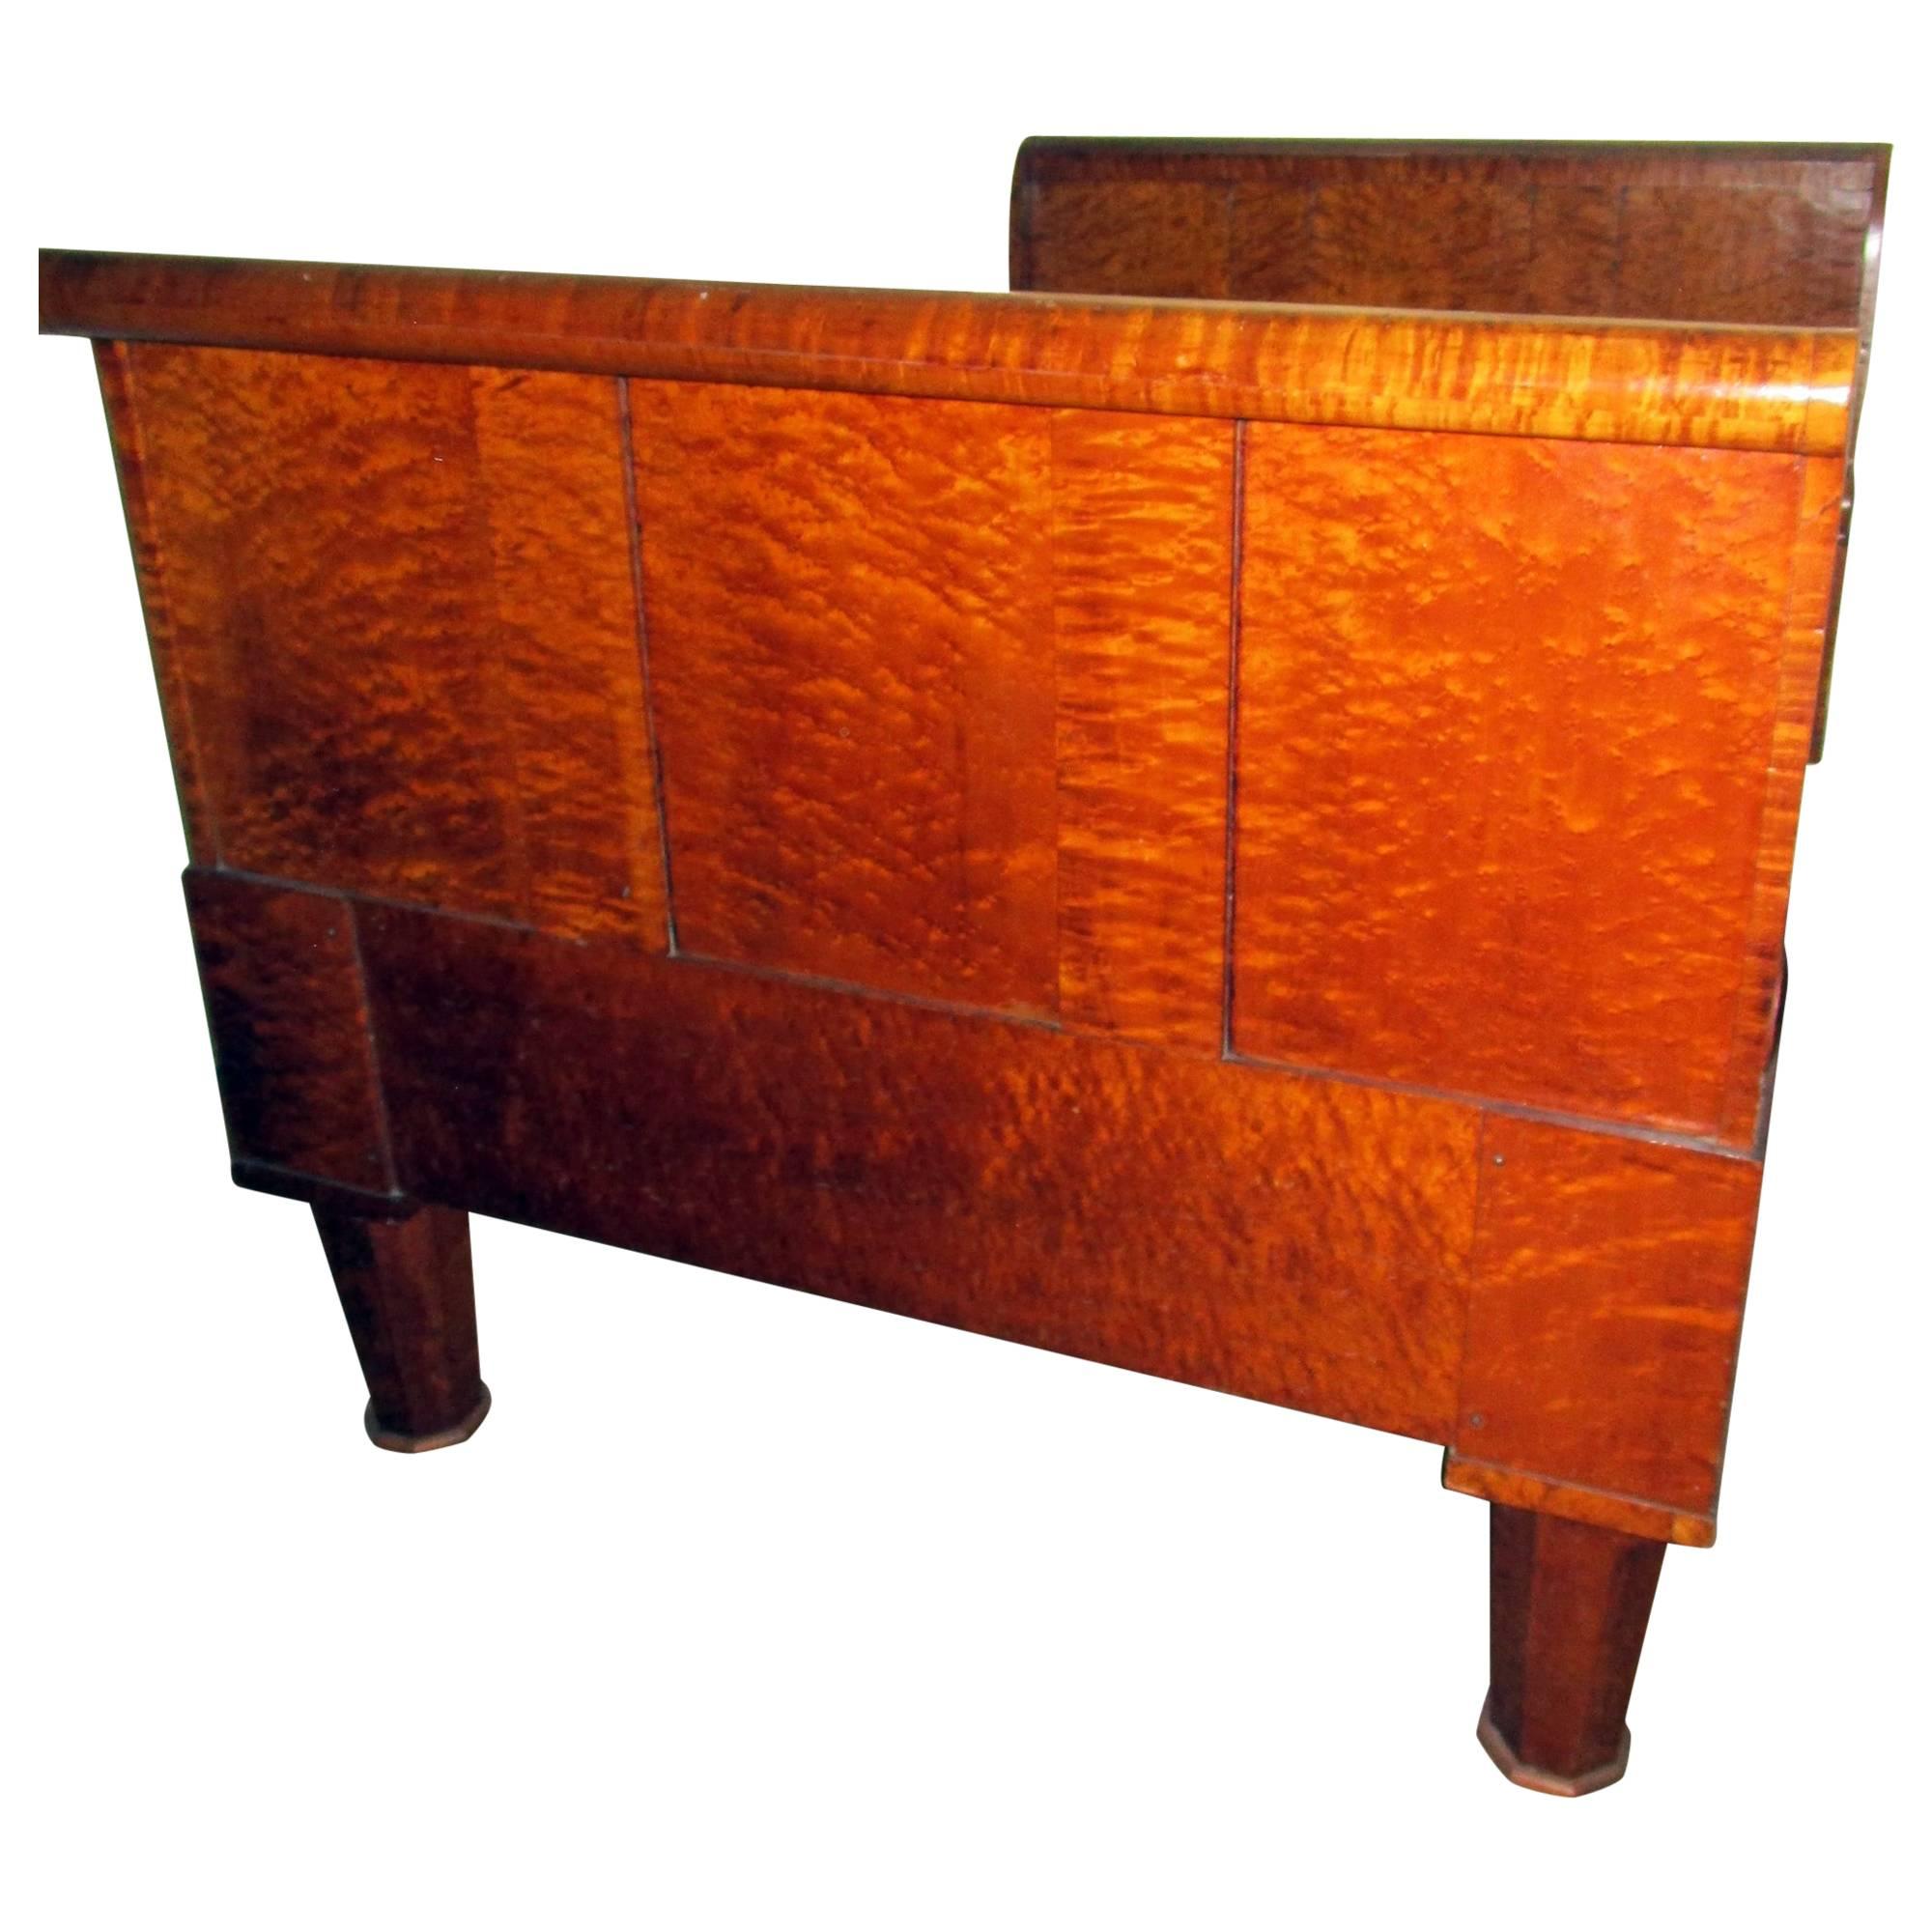 19th century American Bird's-Eye and Tiger Maple Sleigh Bed